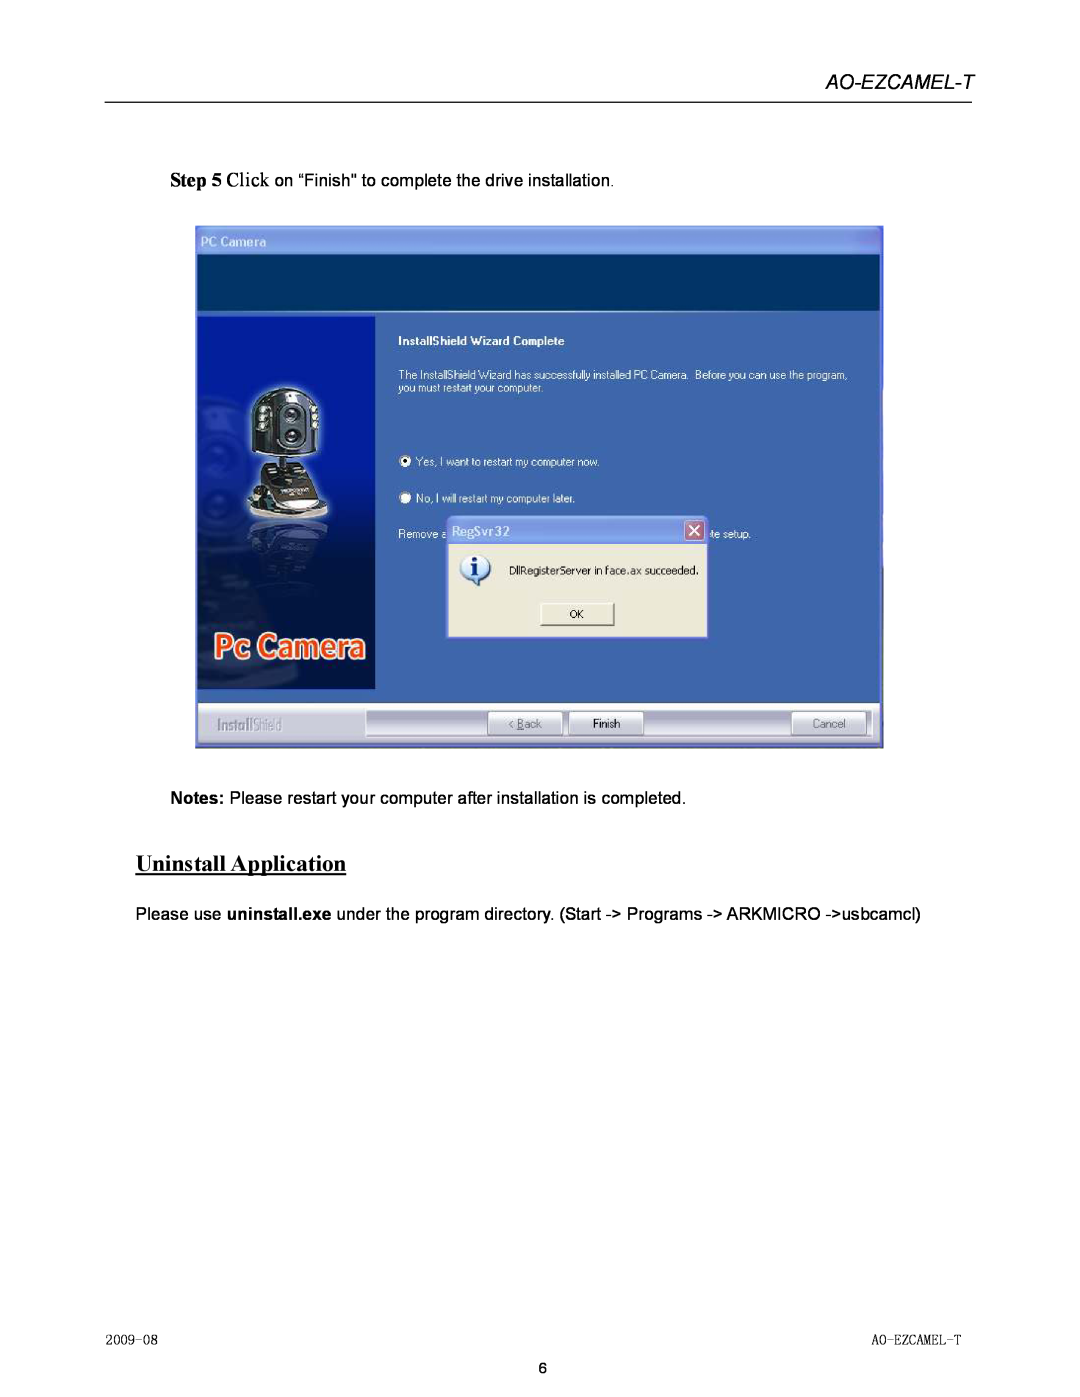 Laser AO-EZCAMEL-T manual Uninstall Application, Ao-Ezcamel-T, Click on “Finish to complete the drive installation, 2009-08 